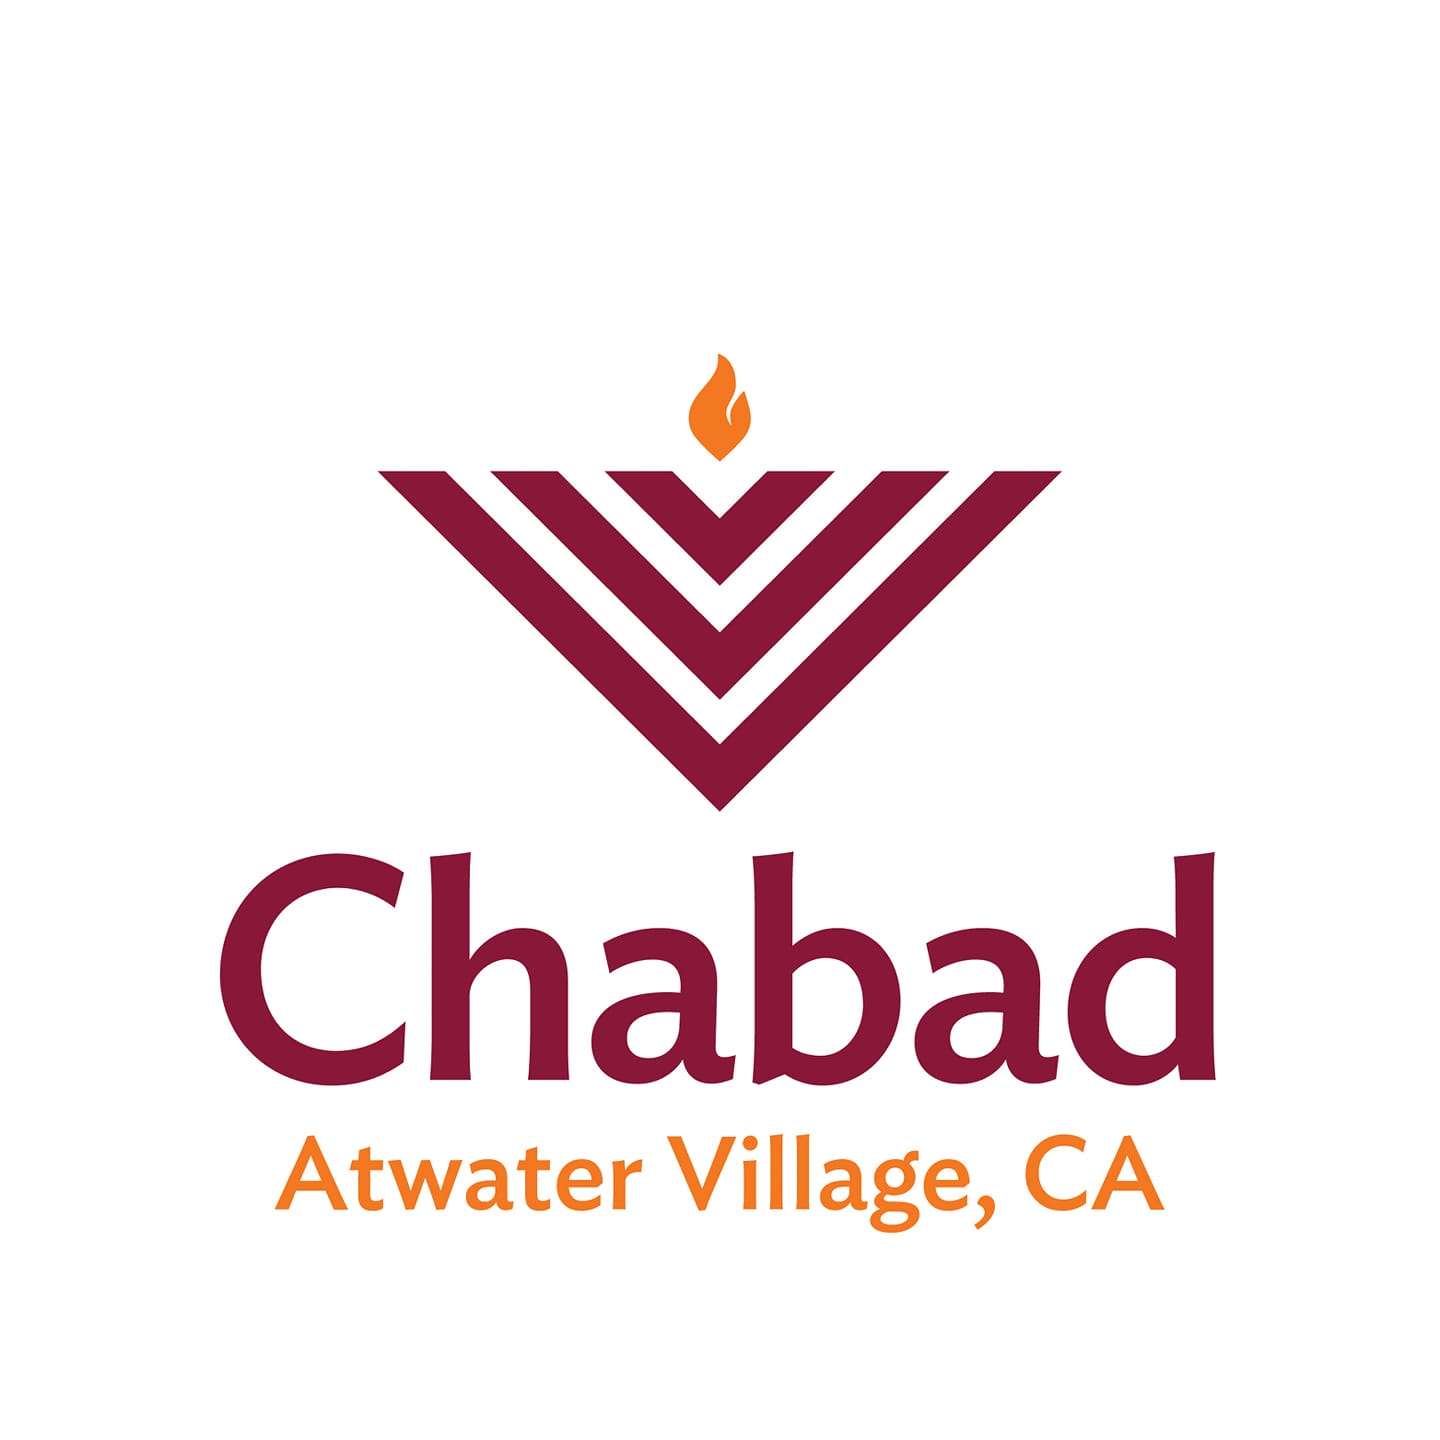 Chabad Atwater Village